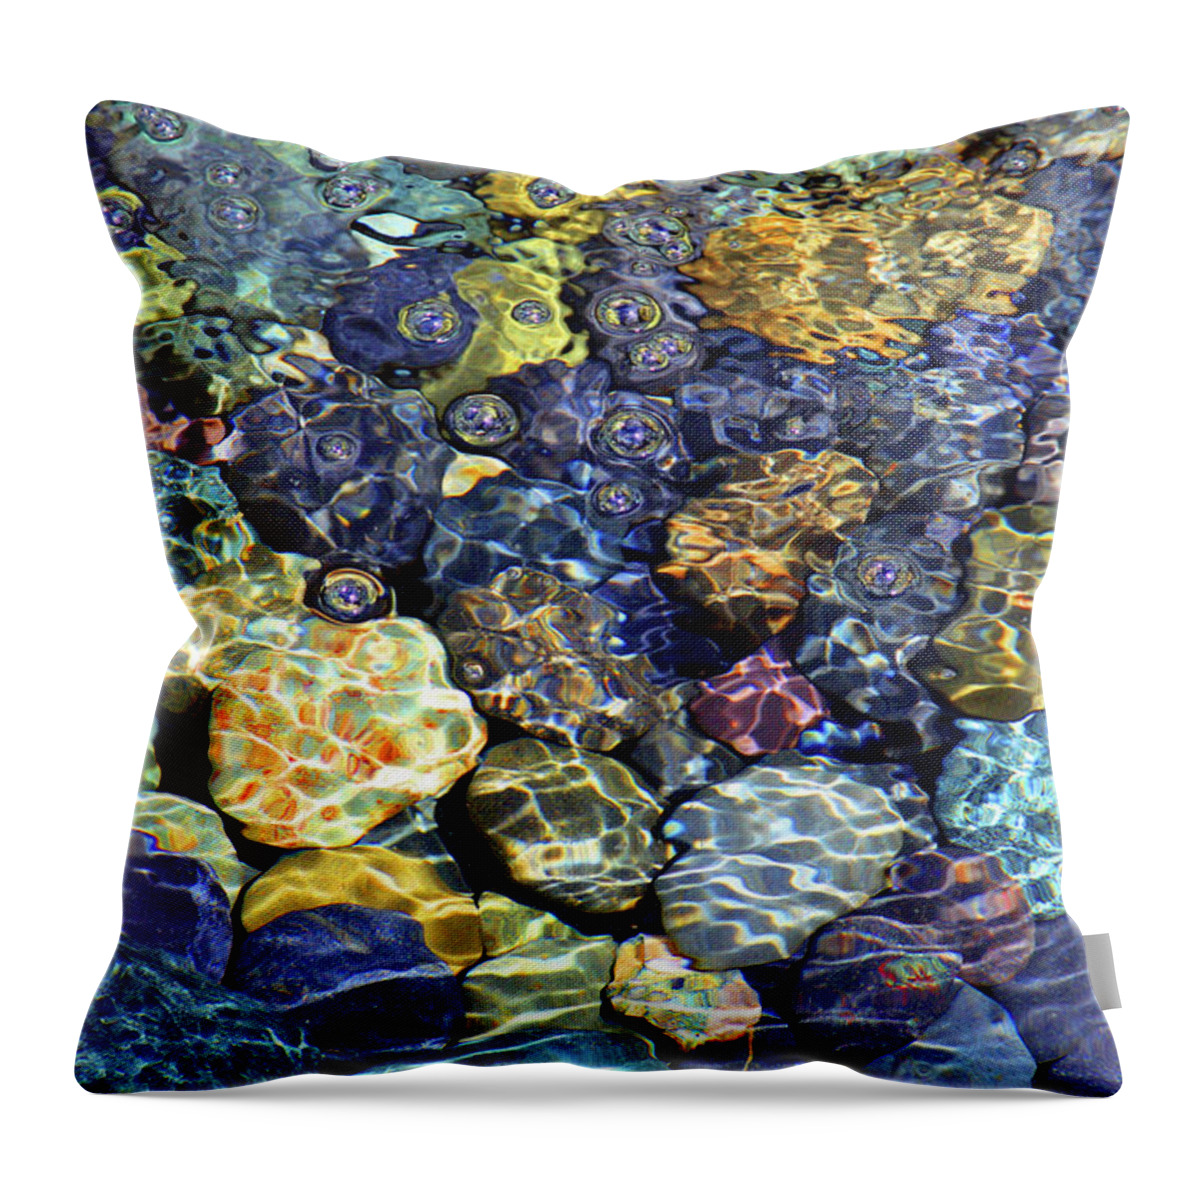 Stones Throw Pillow featuring the photograph Stones 6623 by Carolyn Stagger Cokley